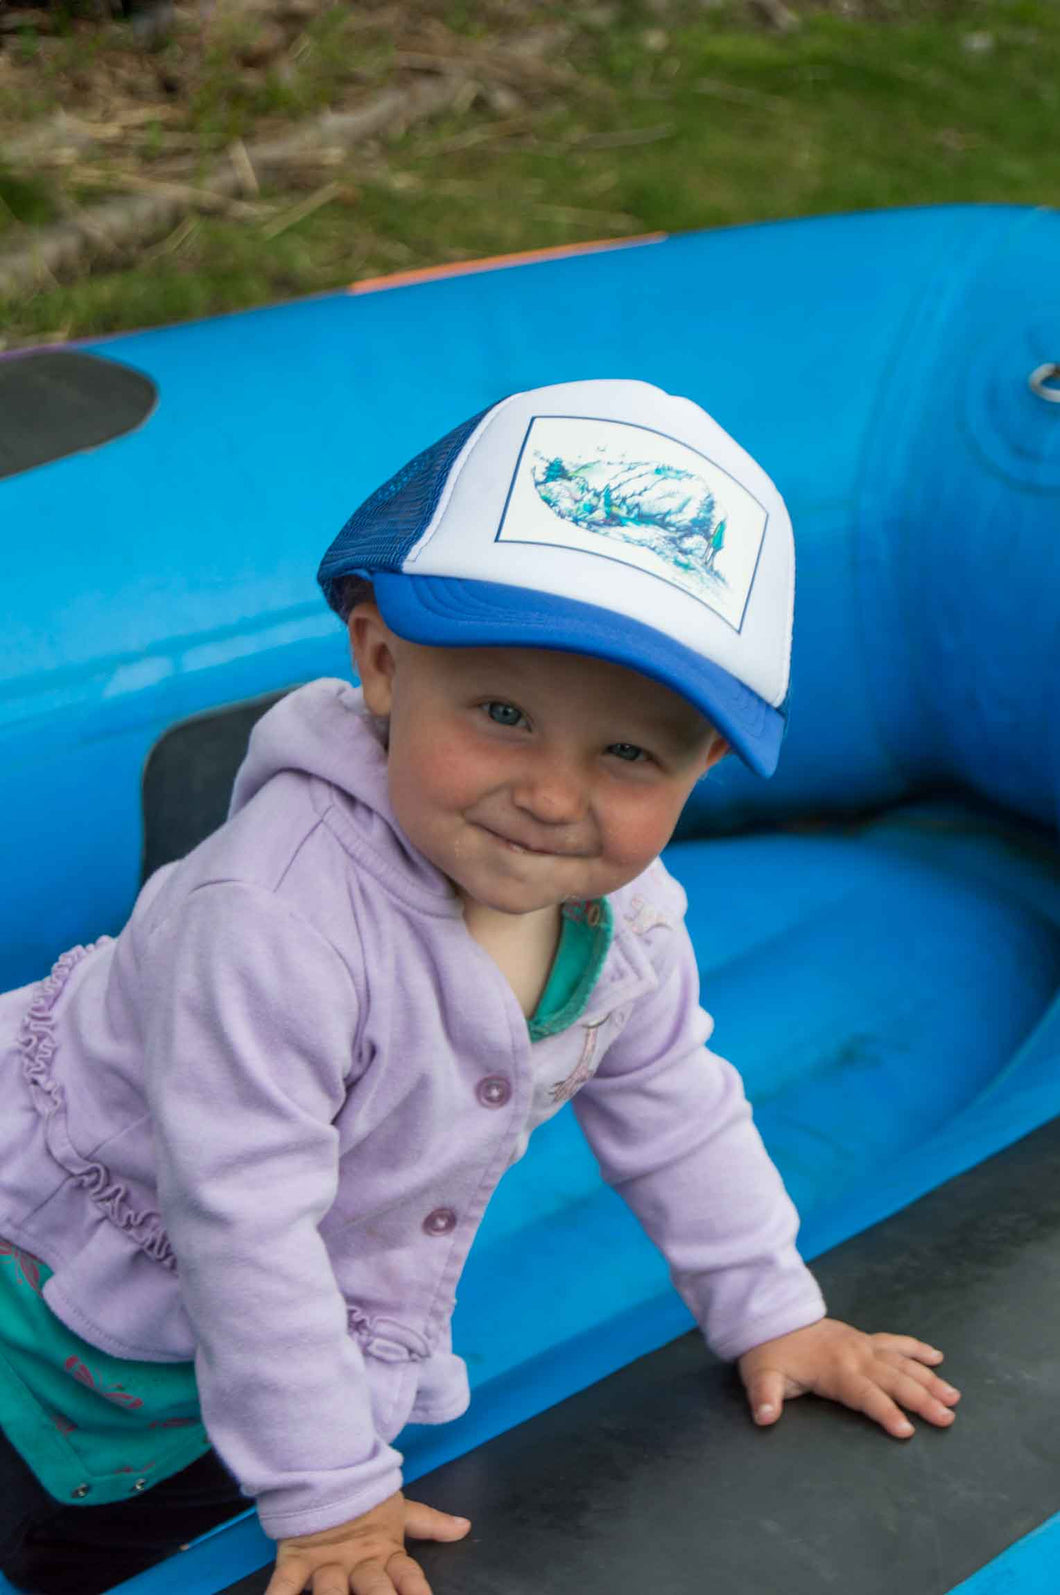 On the Water Toddler/Baby Trucker Hat, Ani Eastwood